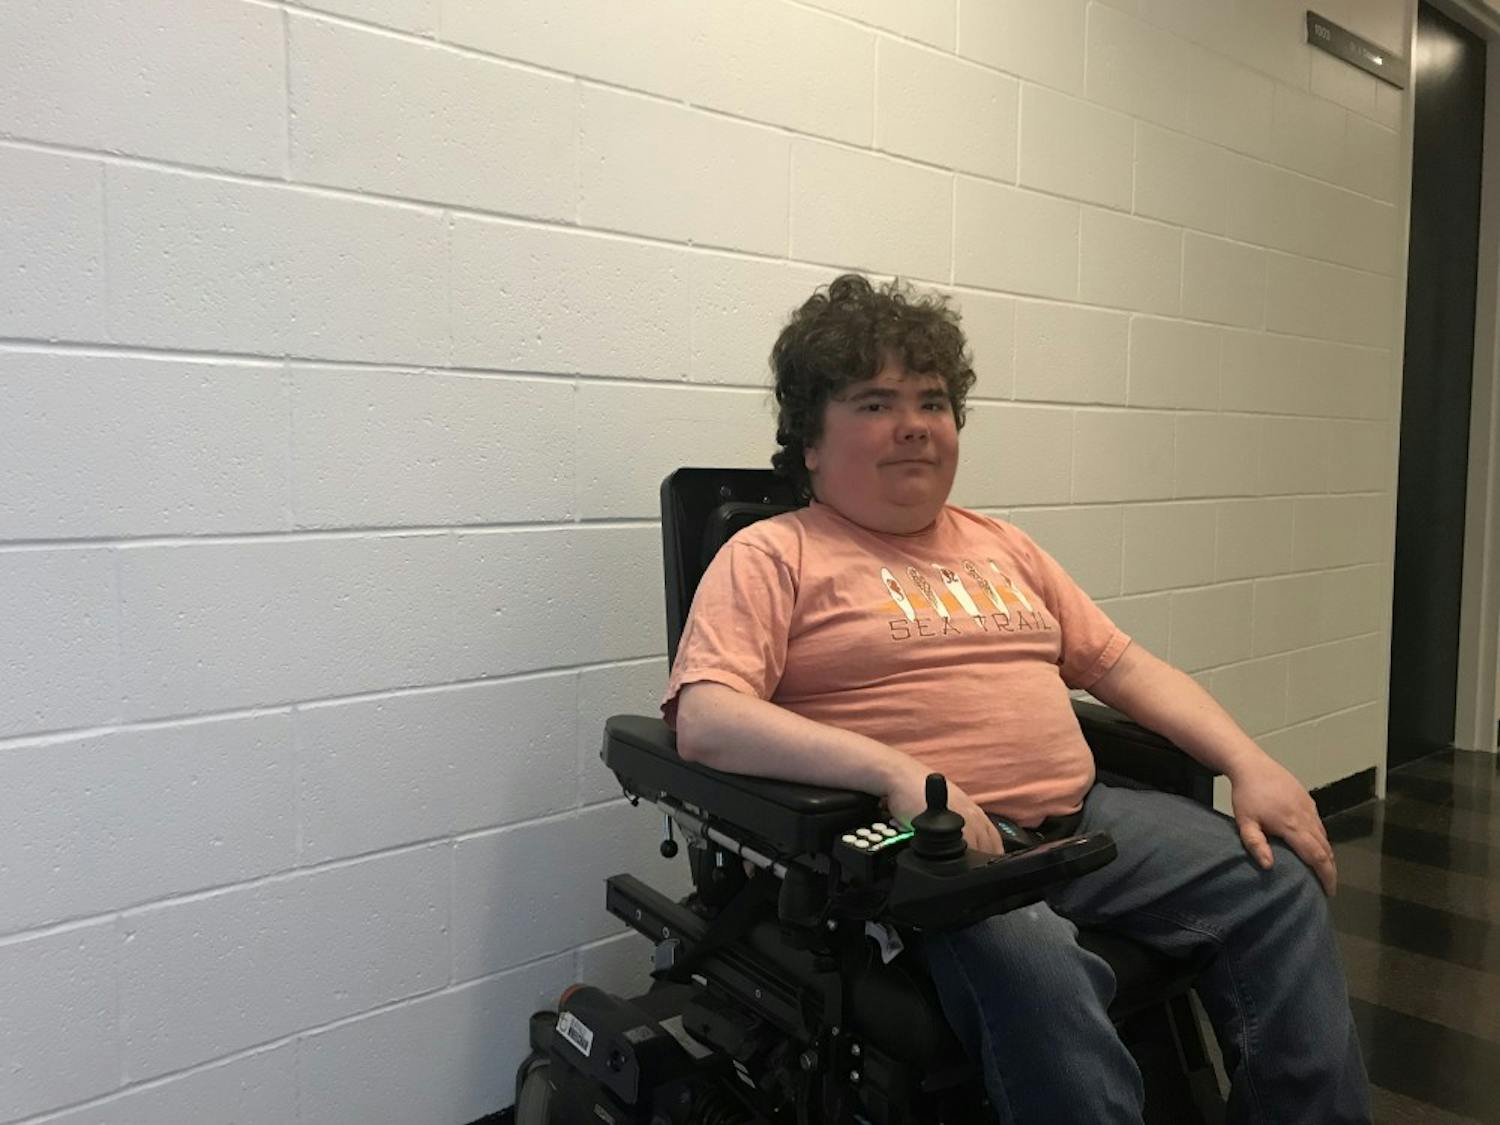 Graduate Student Zachary Dickman couldn’t get into one of his classrooms last semester since the door was already closed and he couldn’t get anyones attention inside.